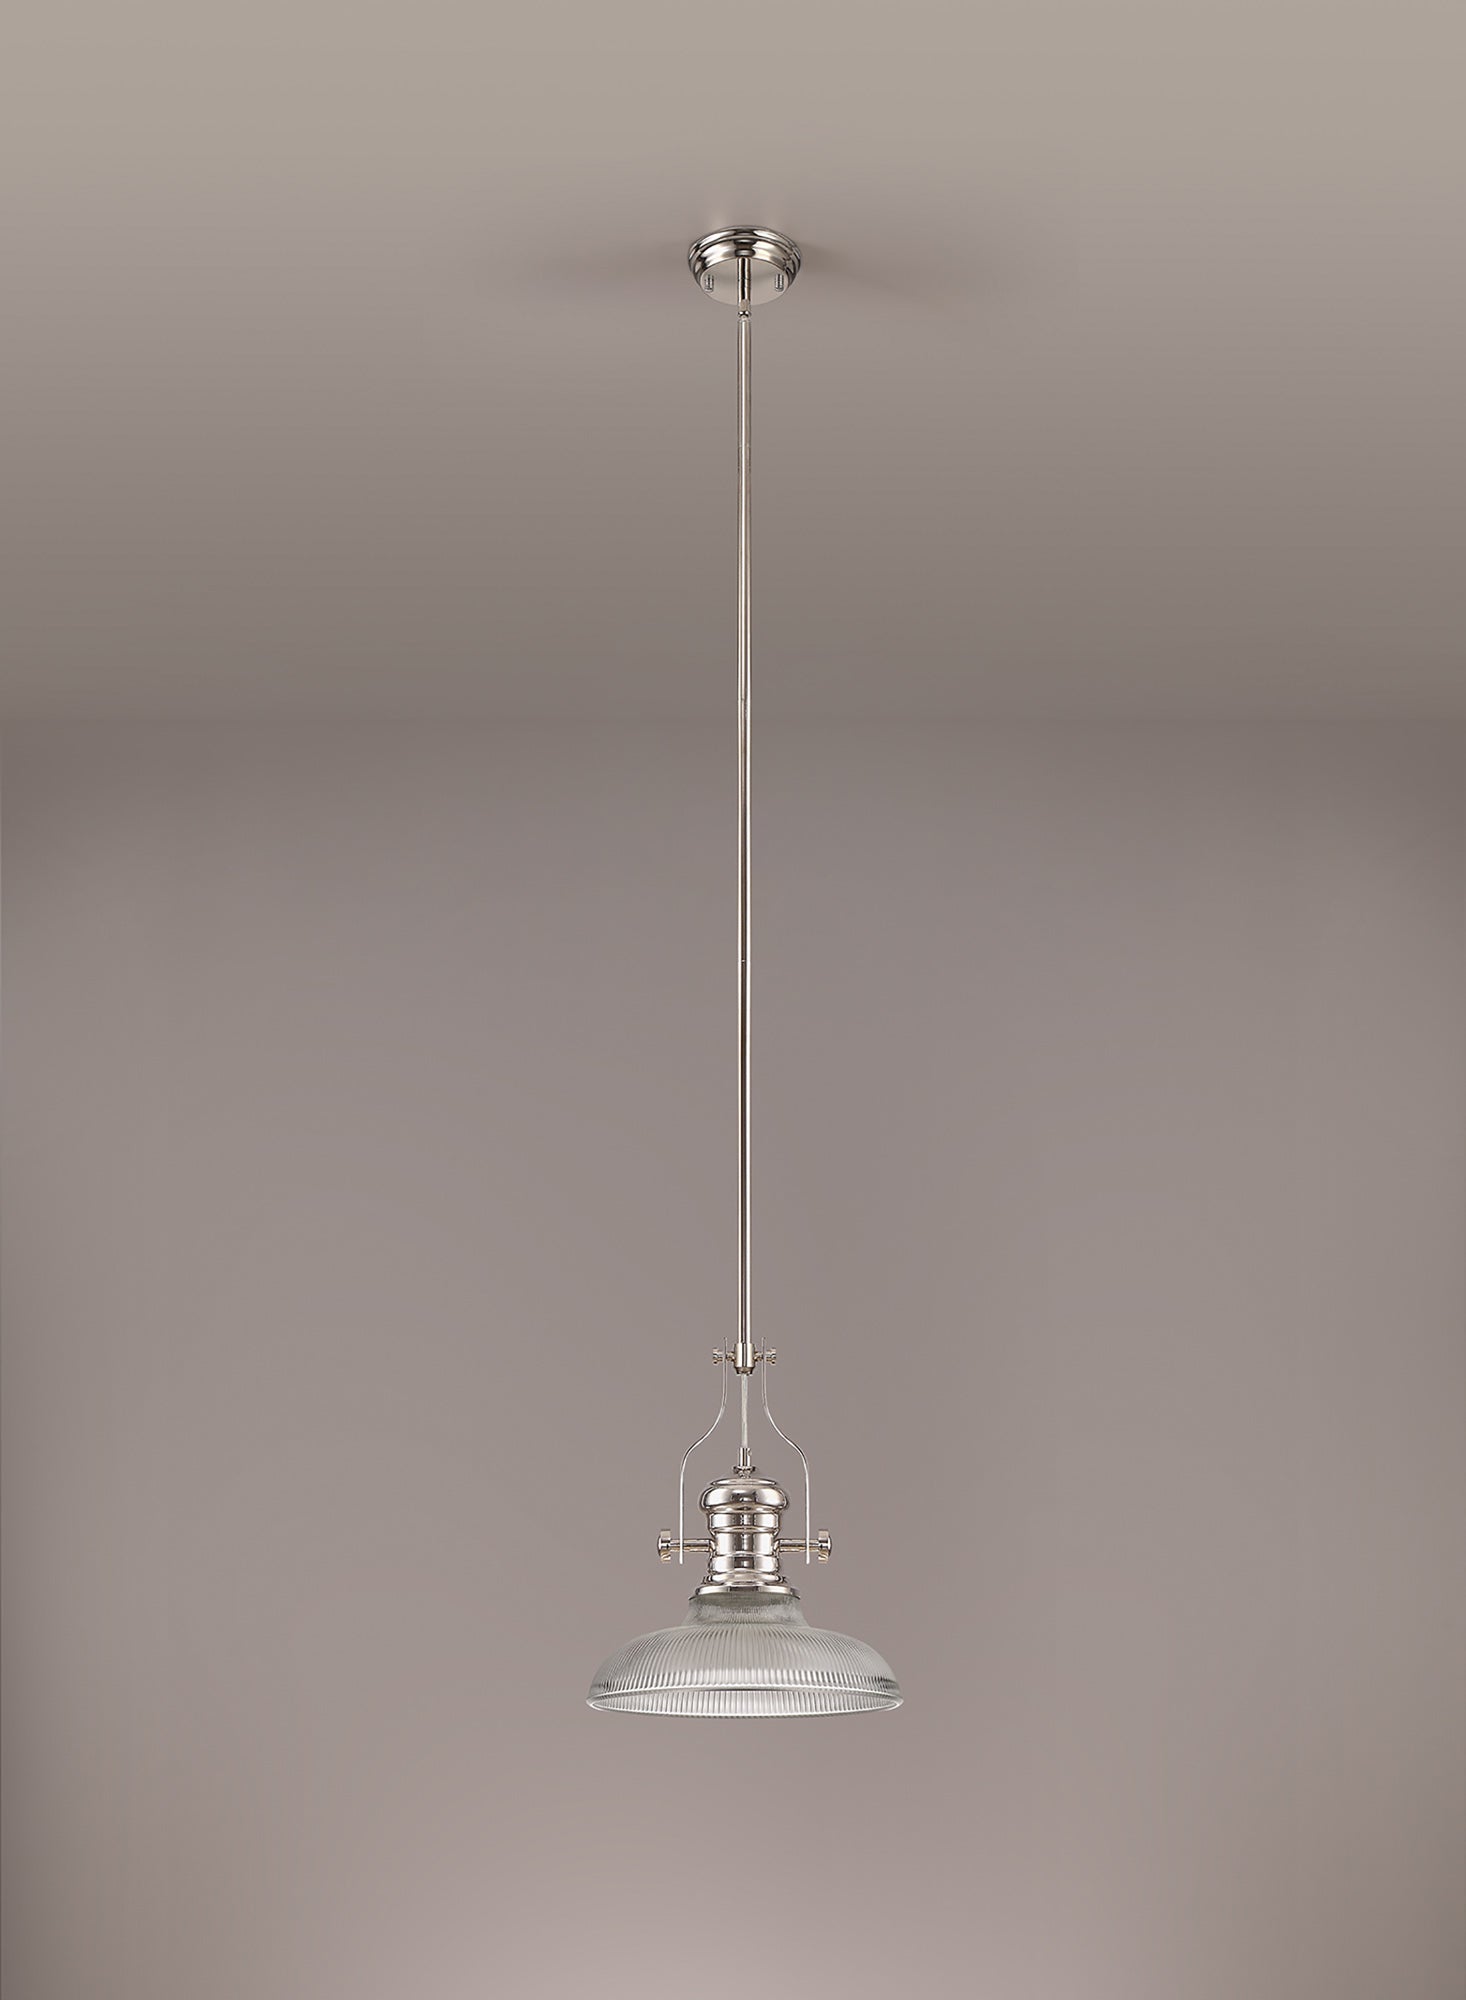 Docker 1 Light Pendant E27 With 30cm Round Glass Shade, Polished Nickel/Clear